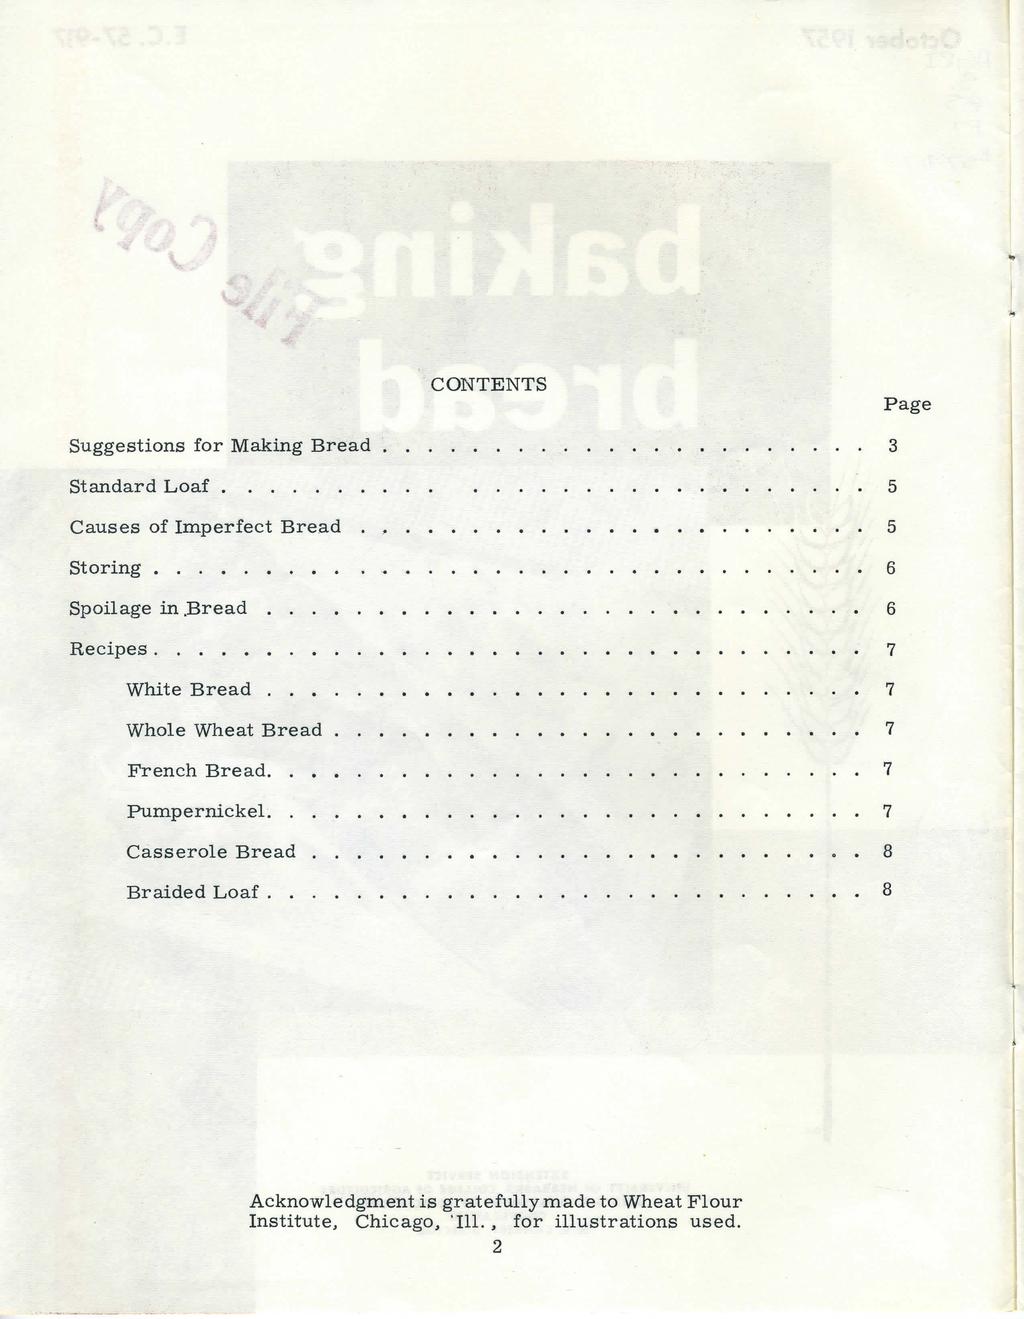 .. CONTENTS Page Suggestions for Making Bread Standard Loaf. Causes of Imperfect Bread Storing..... Spoilage in.bread Recipes...... White Bread Whole Wheat Bread French Bread.